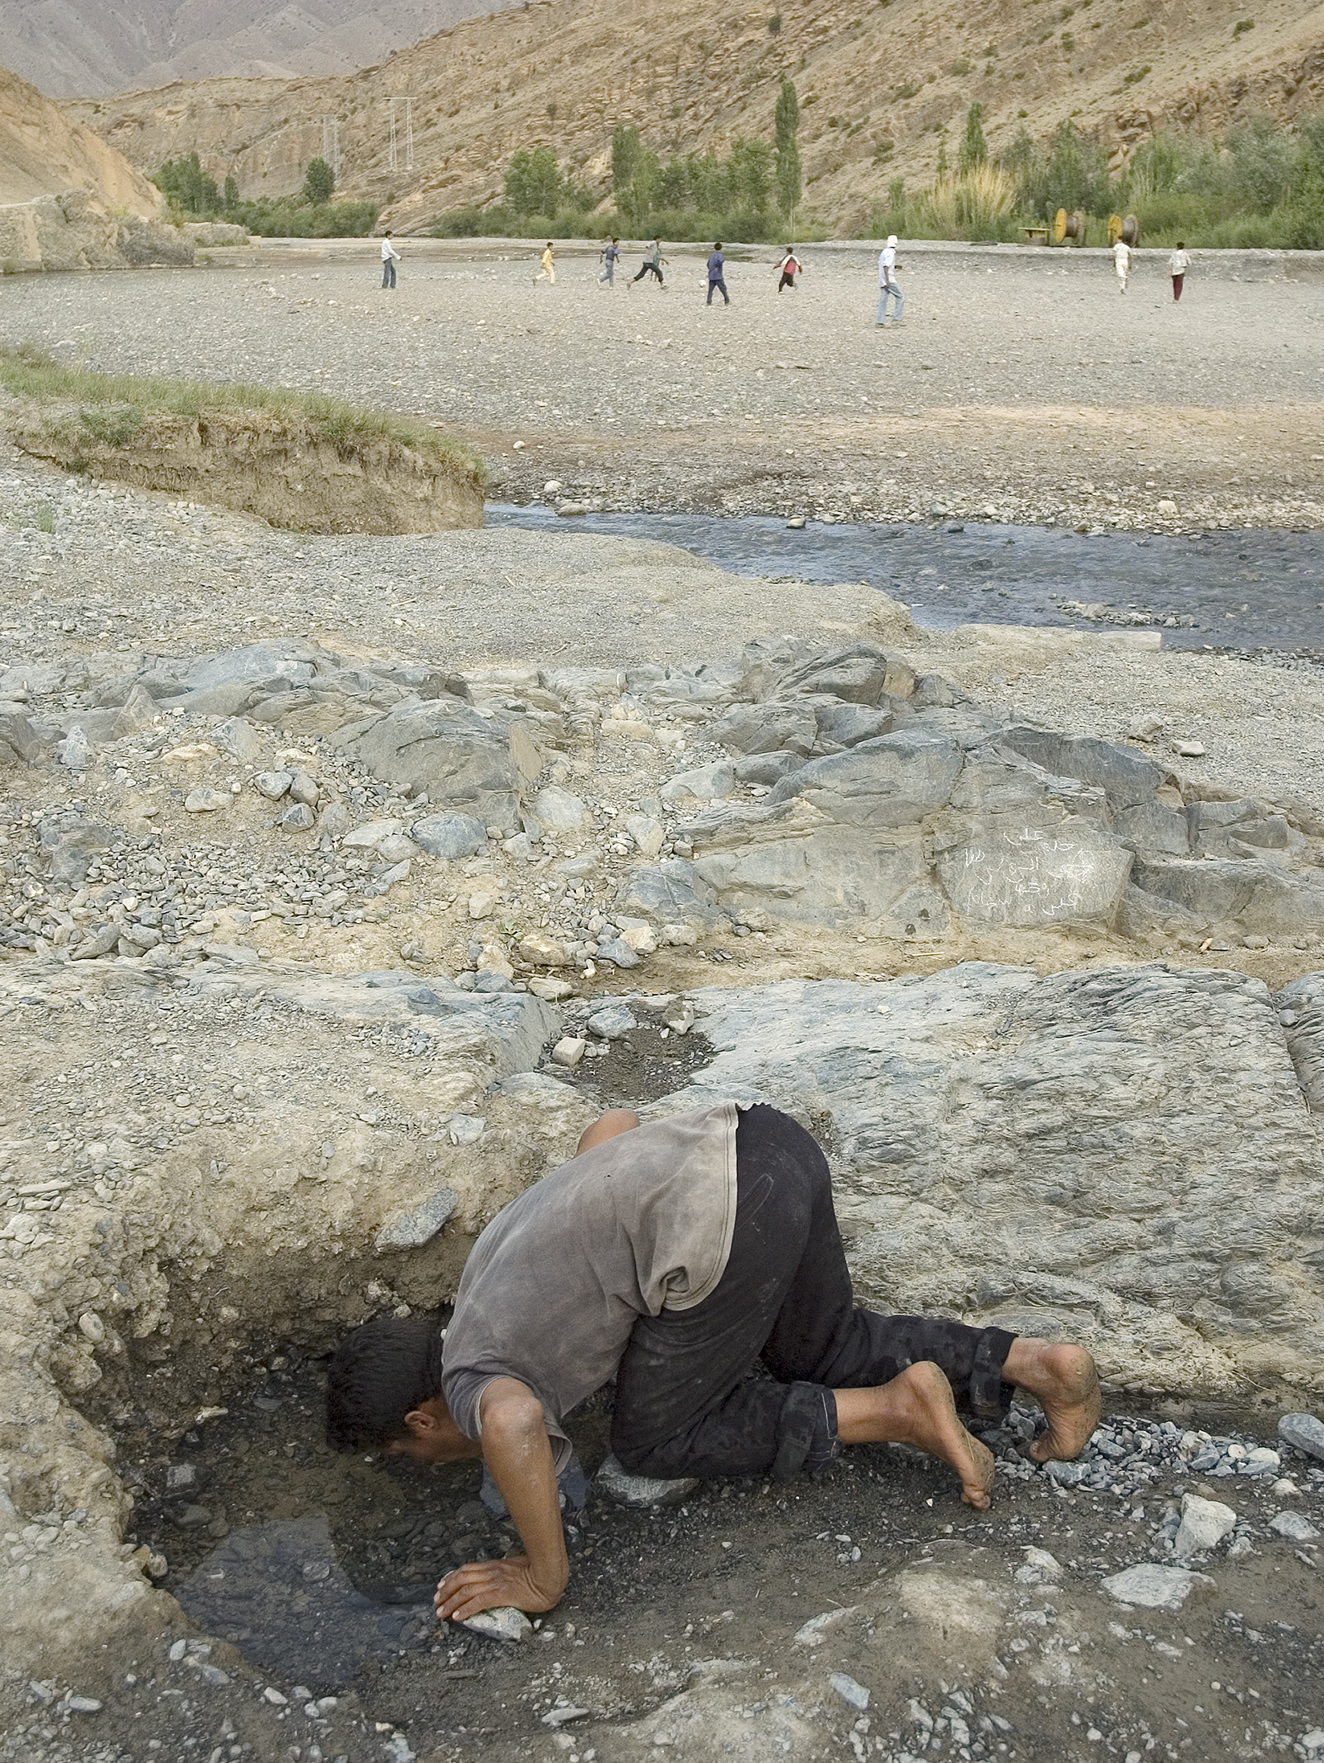  Mohammed drinking from an underground water source on the dry river. 